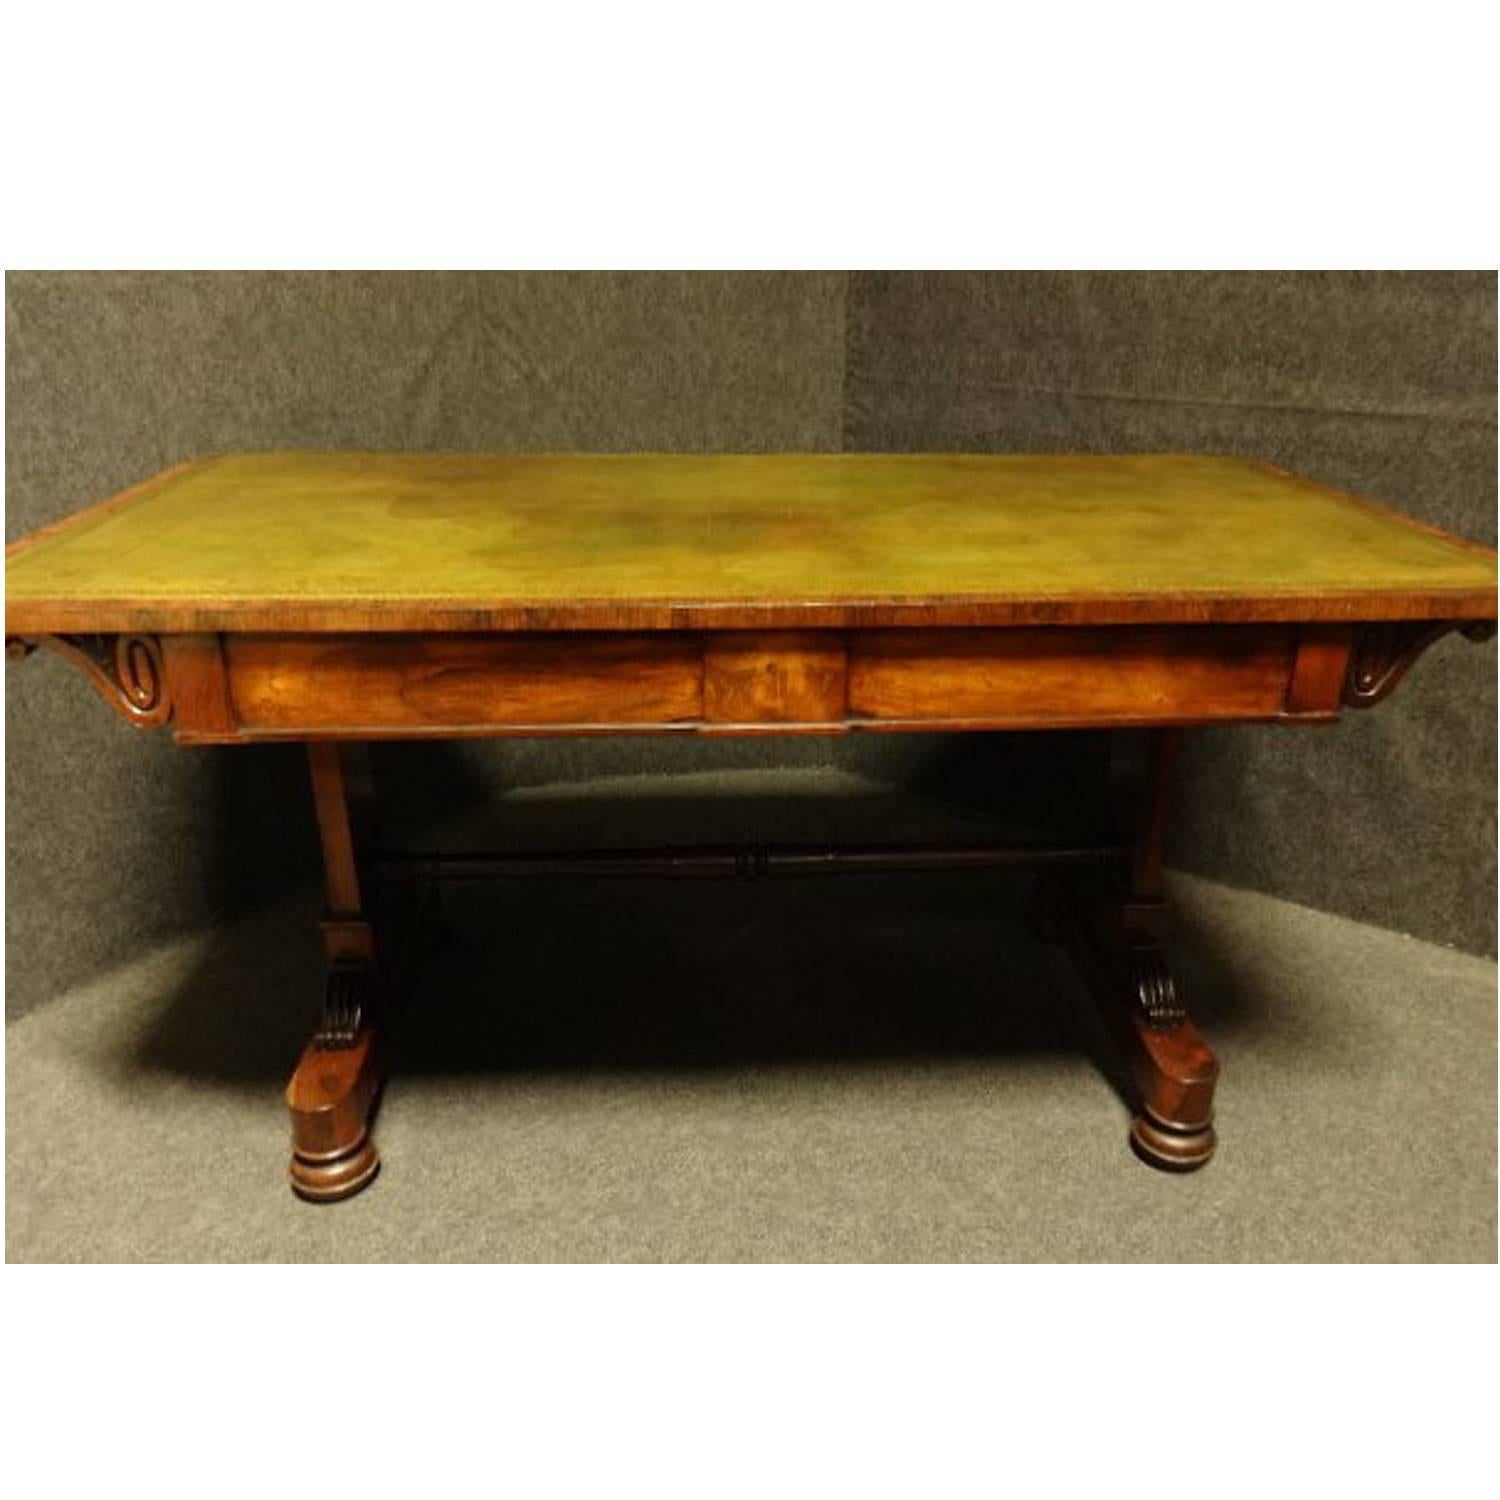 A very good Regency Rosewood library table, excellent color and original condition, double full depth drawers brass castors.